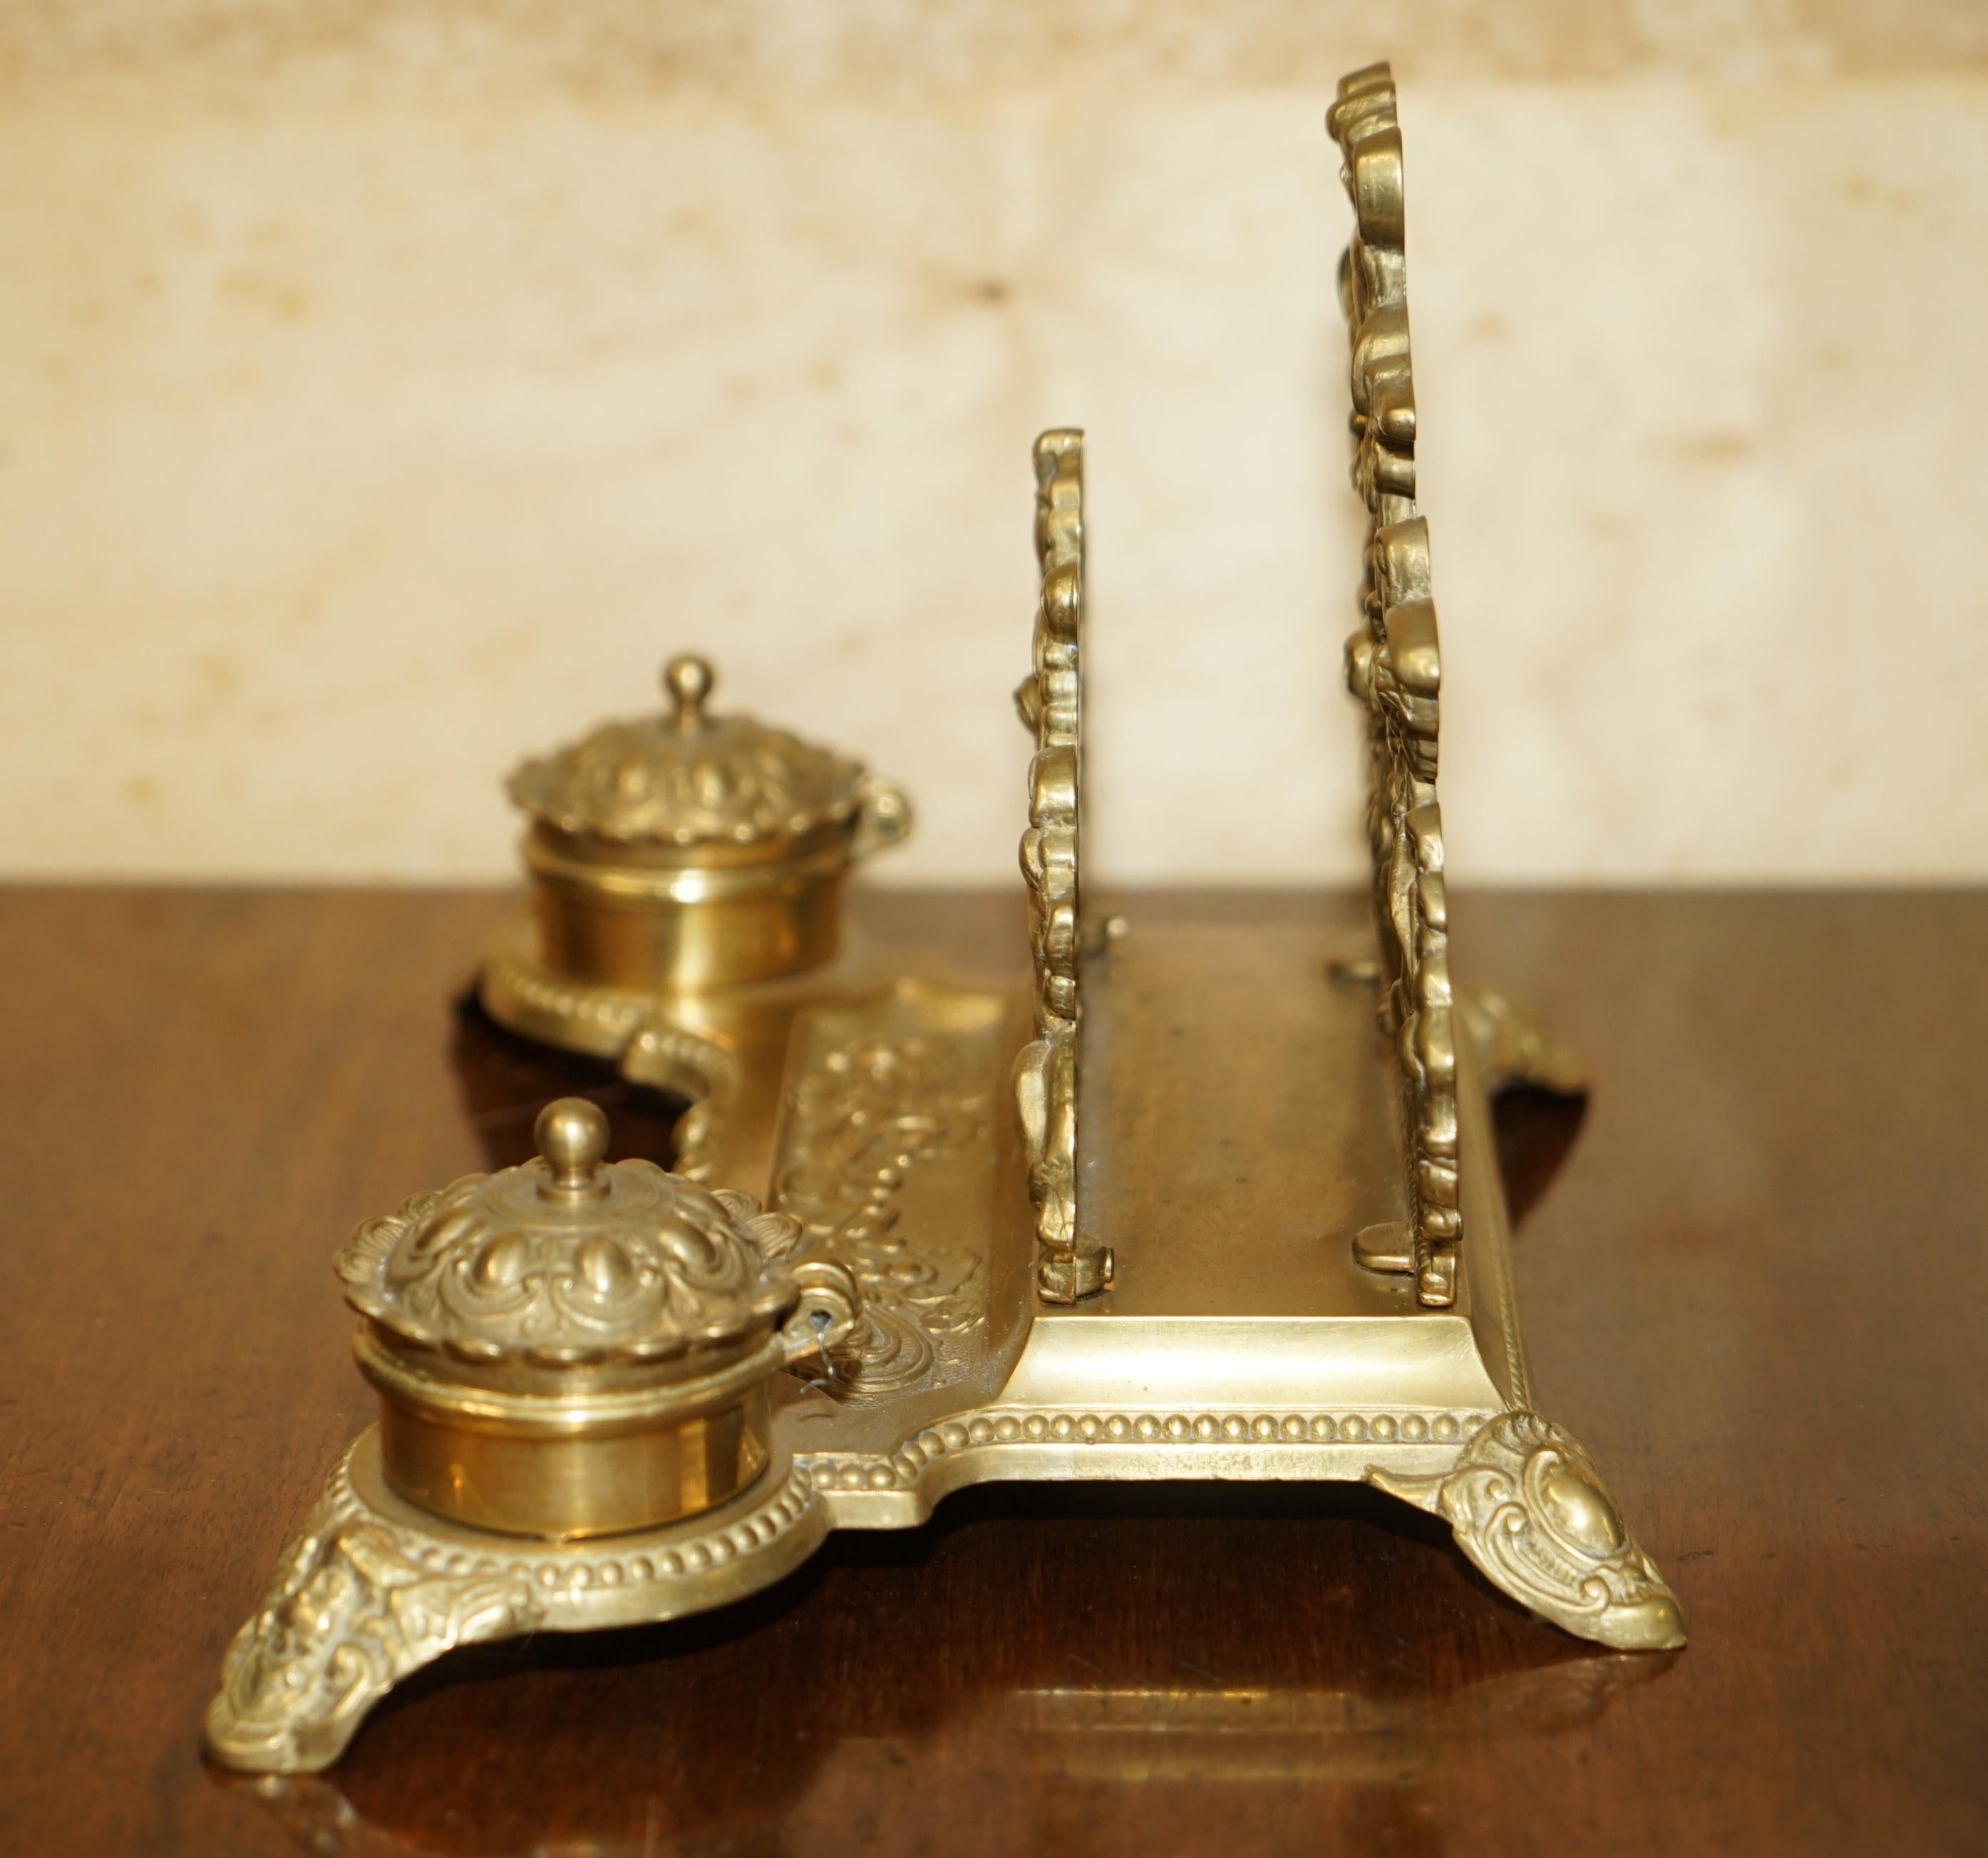 LOVELY ANTIQUE FRENCH BAROQUE REPOUSSE GiLT BRASS CHERUB INKWELL LETTER STAND im Angebot 12